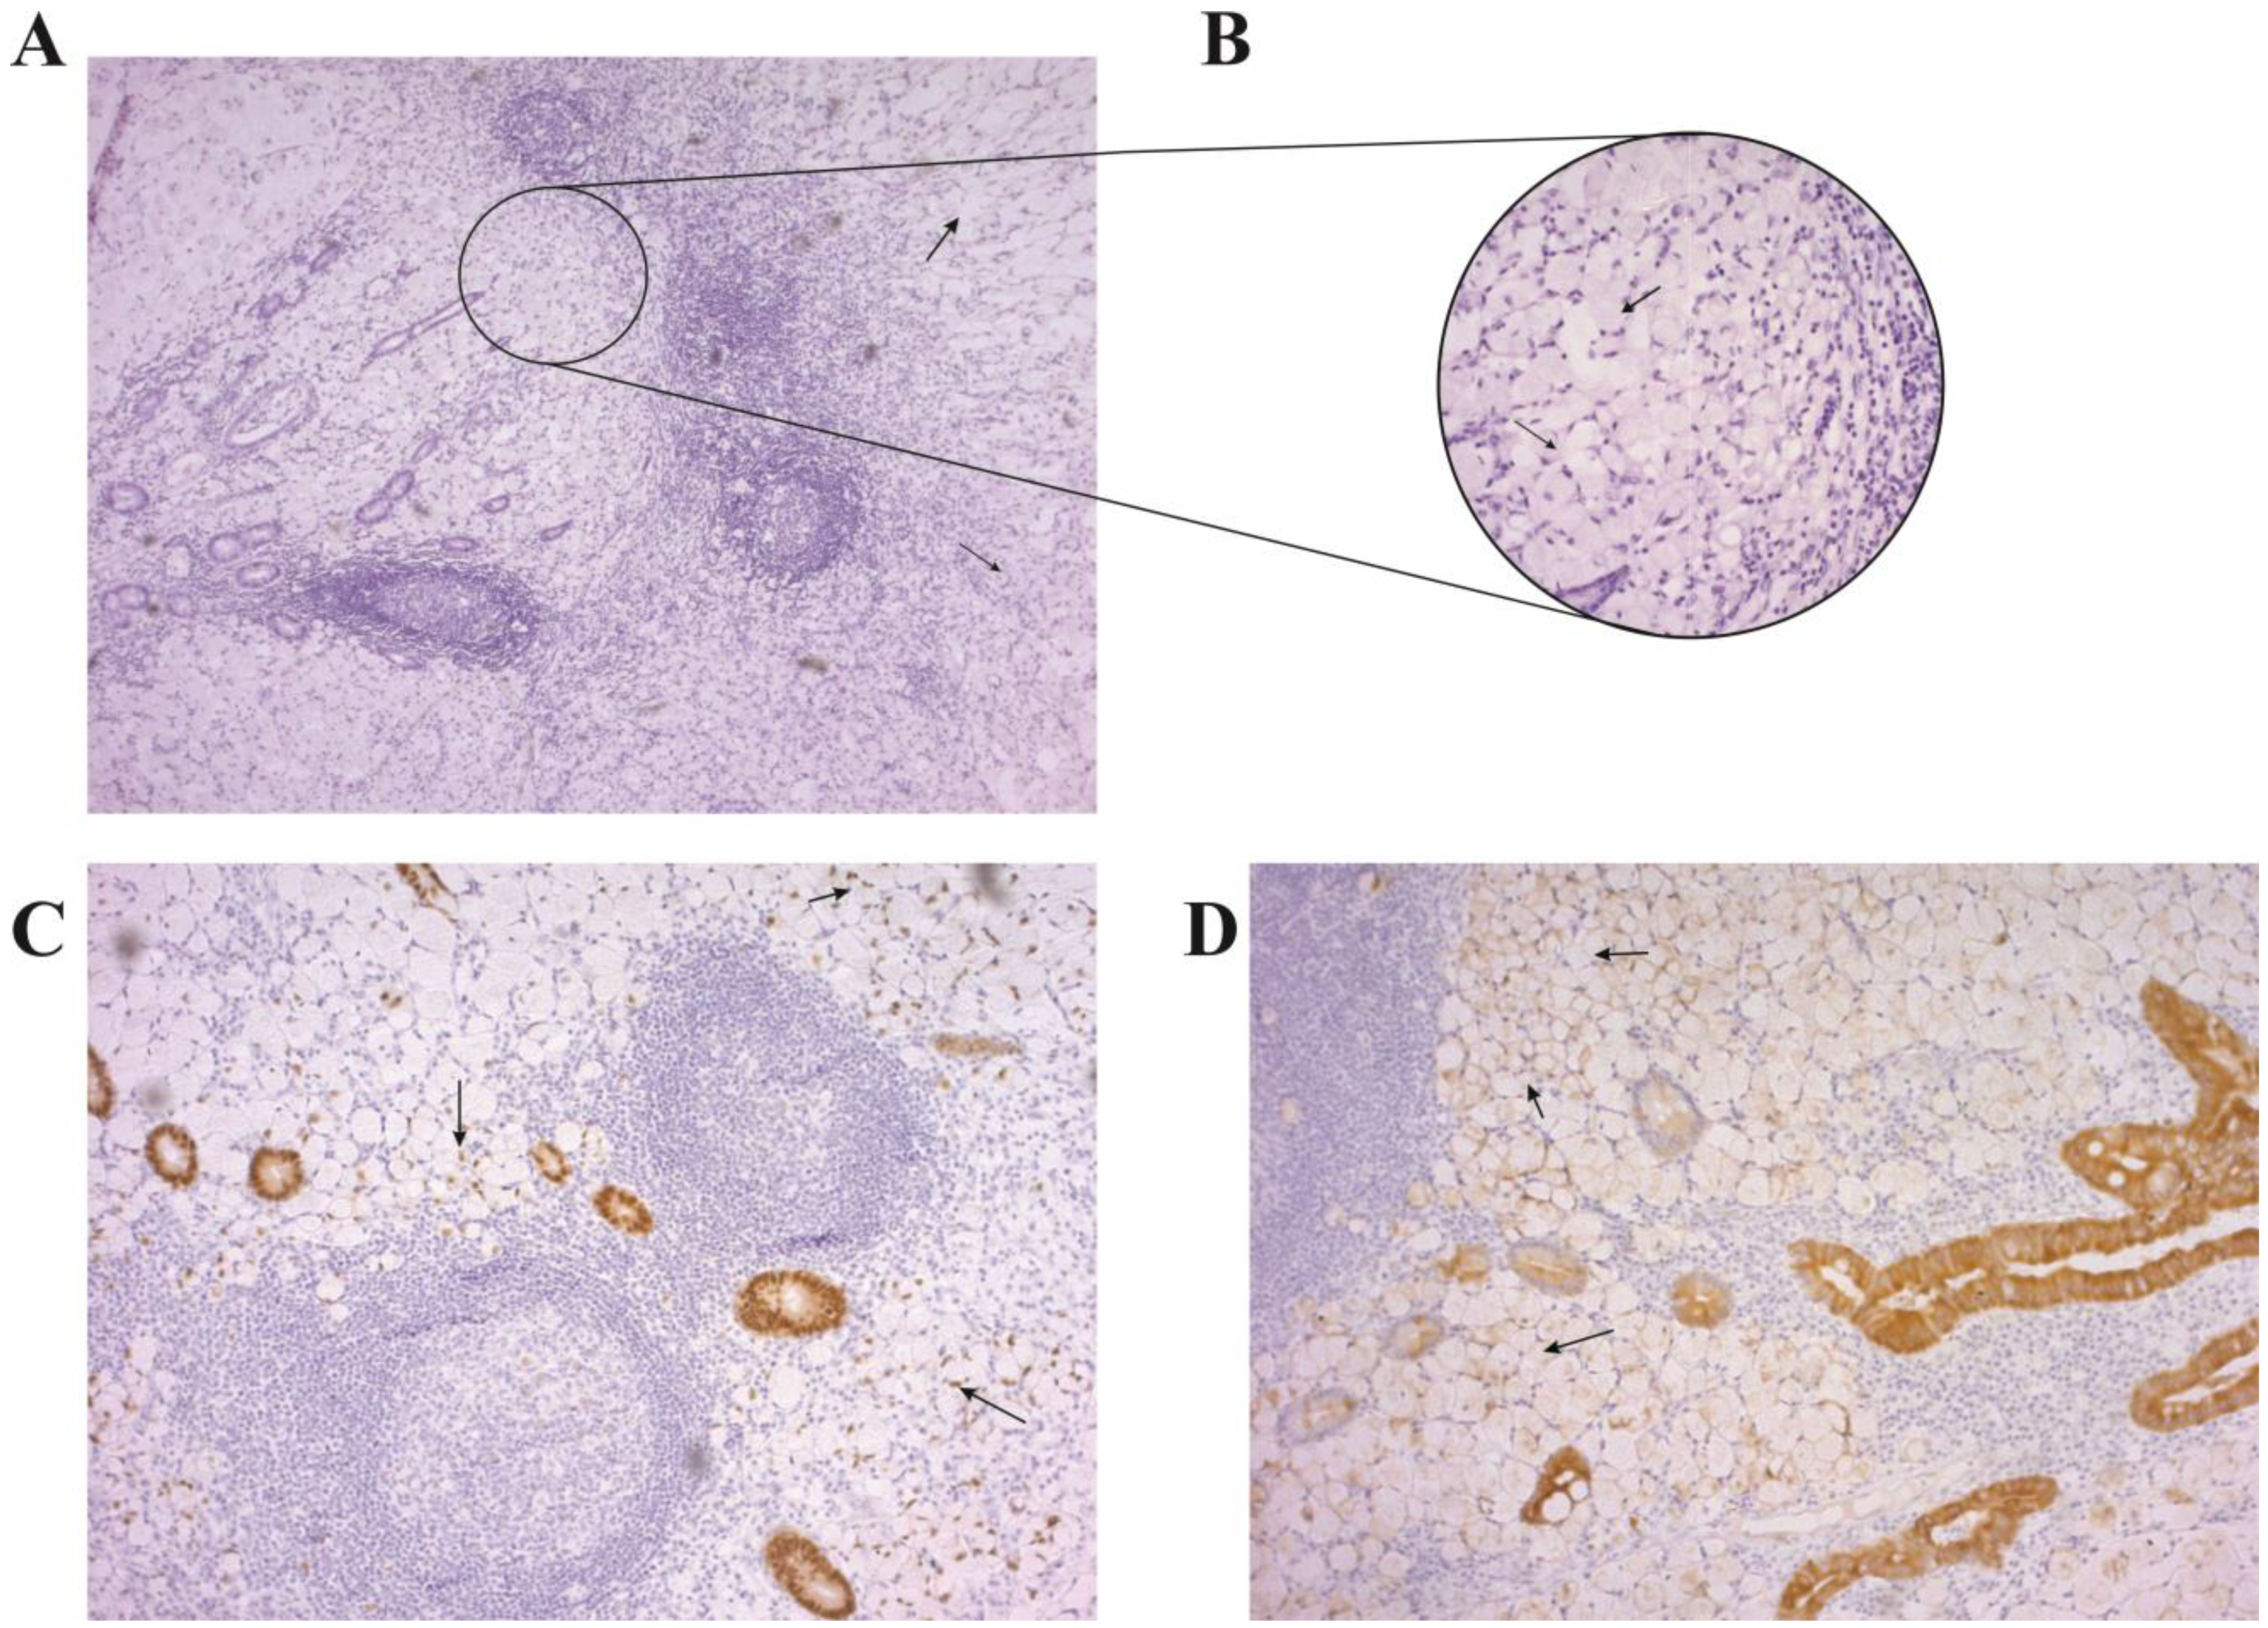 Signet ring stromal cell tumor revisited and related signet ring cell  lesions of the ovary. | Semantic Scholar